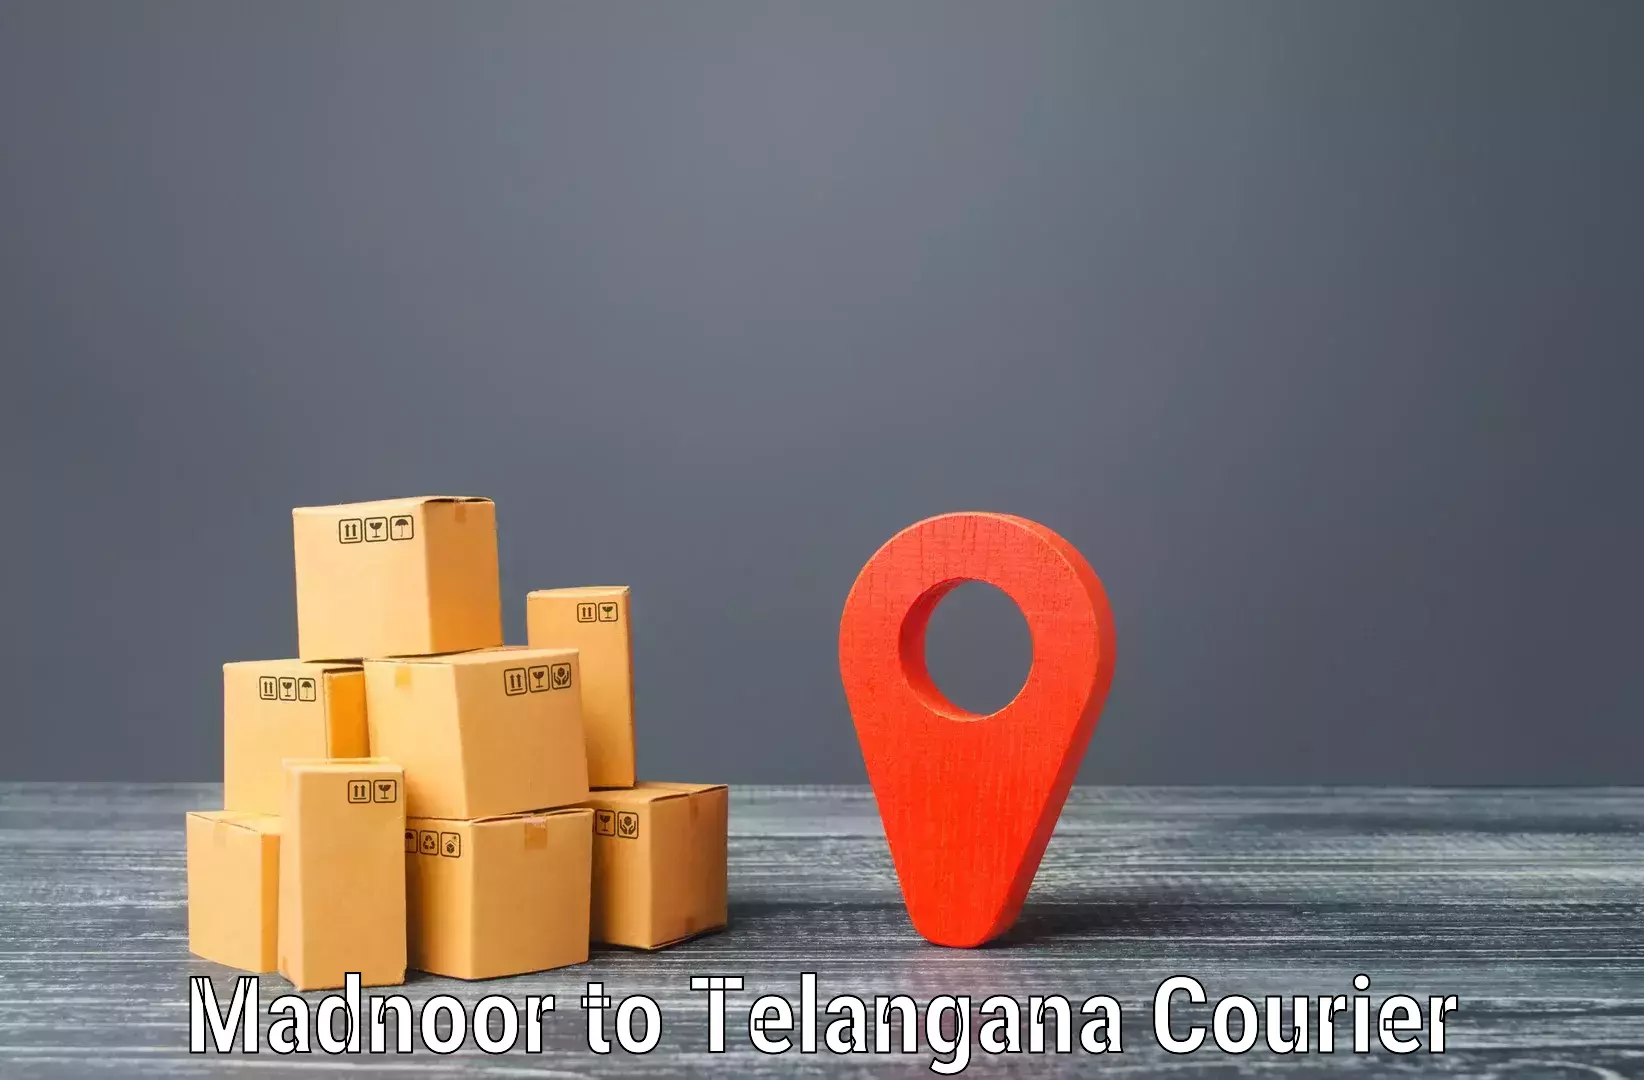 Next-day delivery options Madnoor to Khairatabad